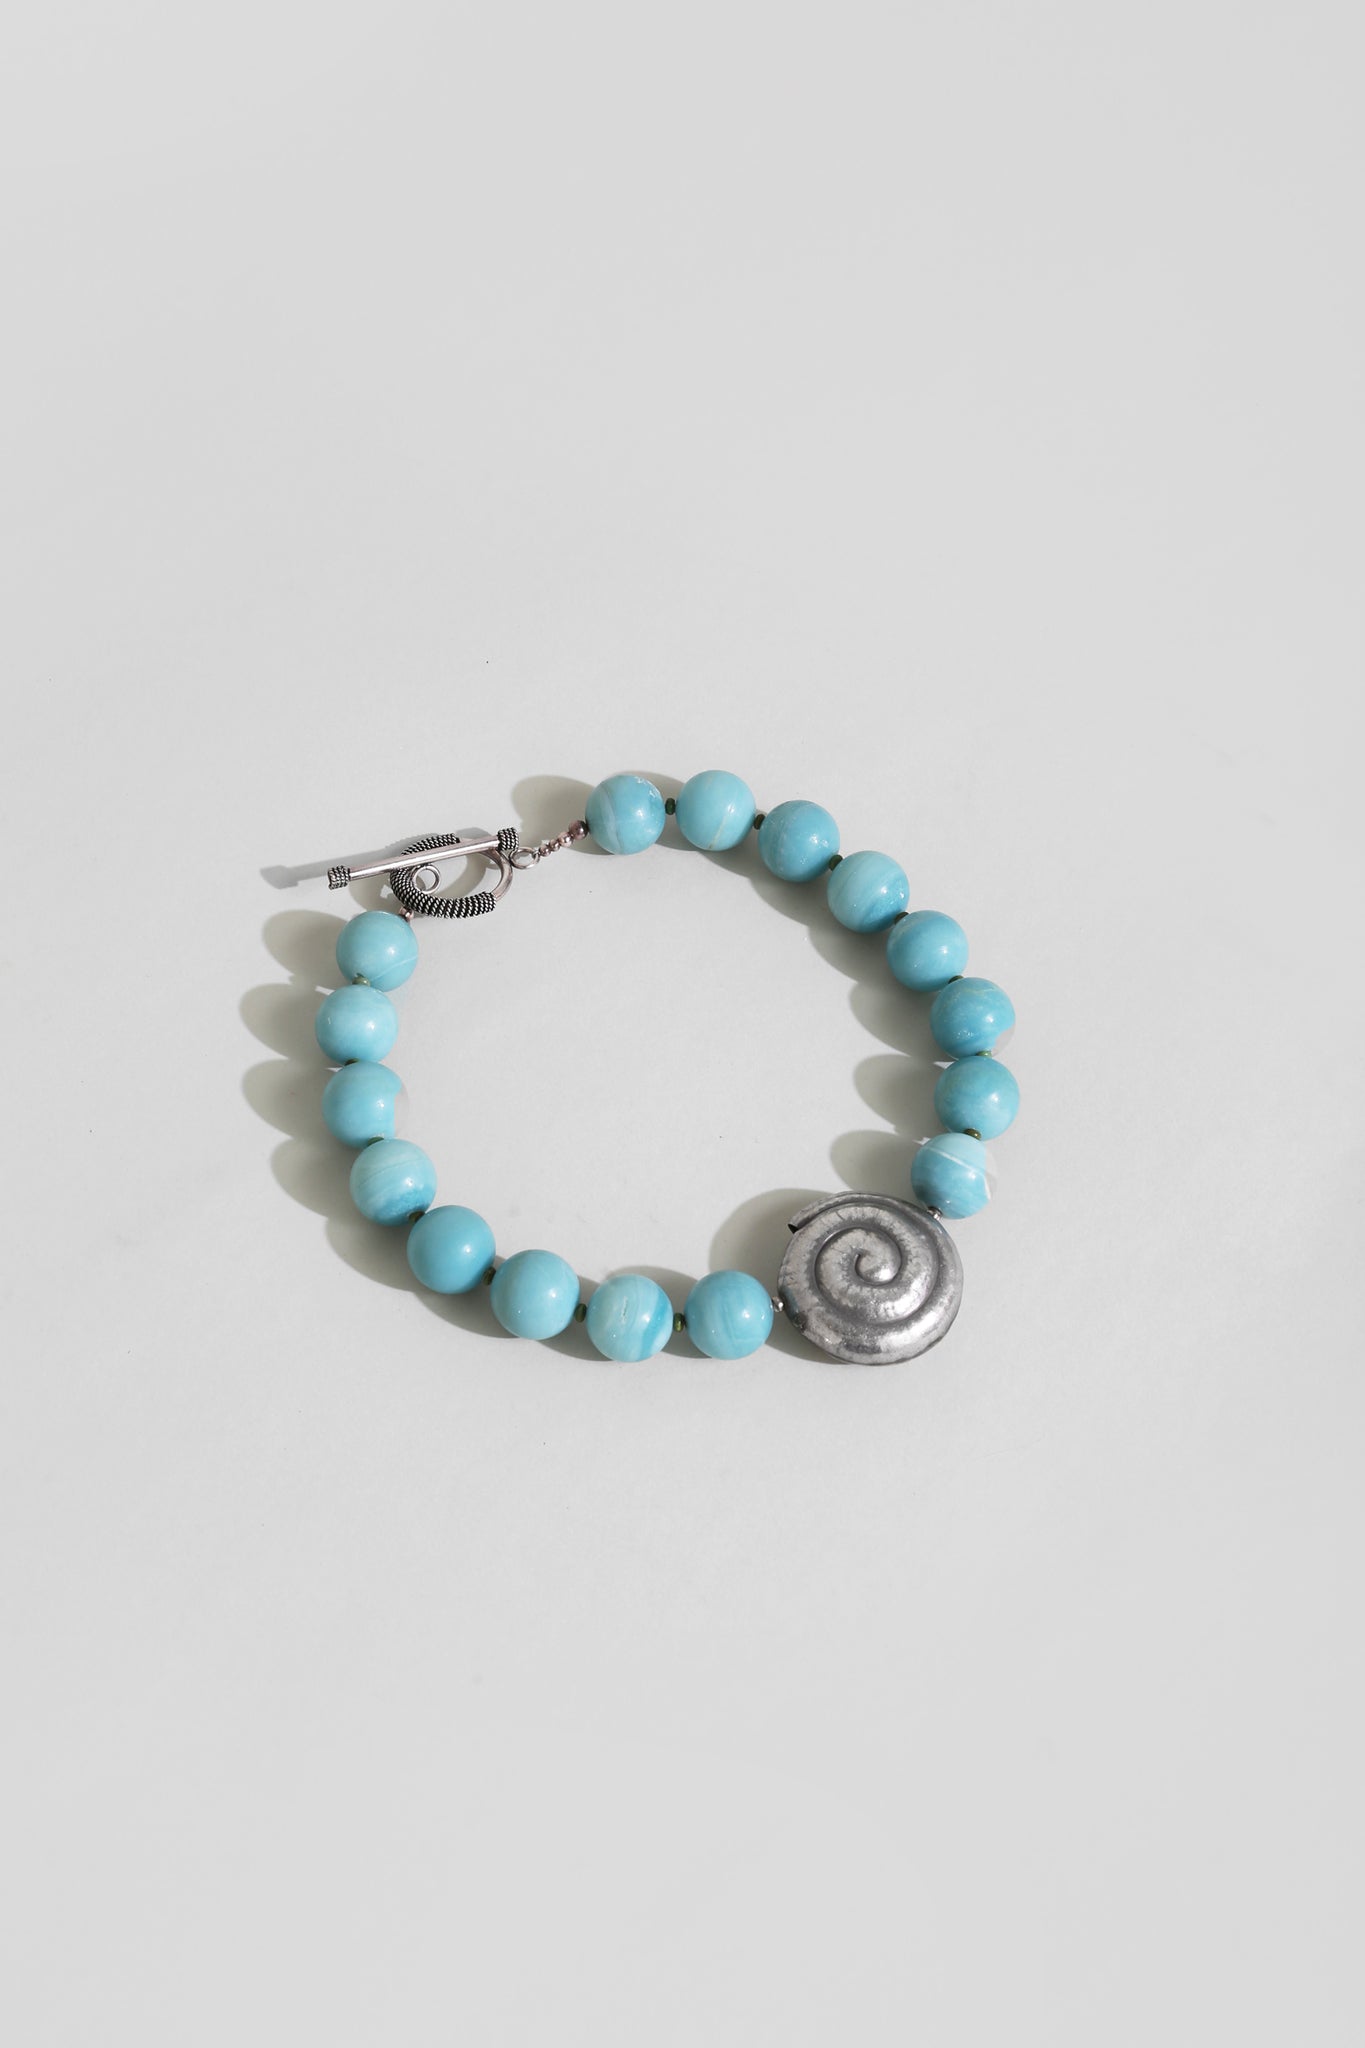 Spiral Shell Necklace